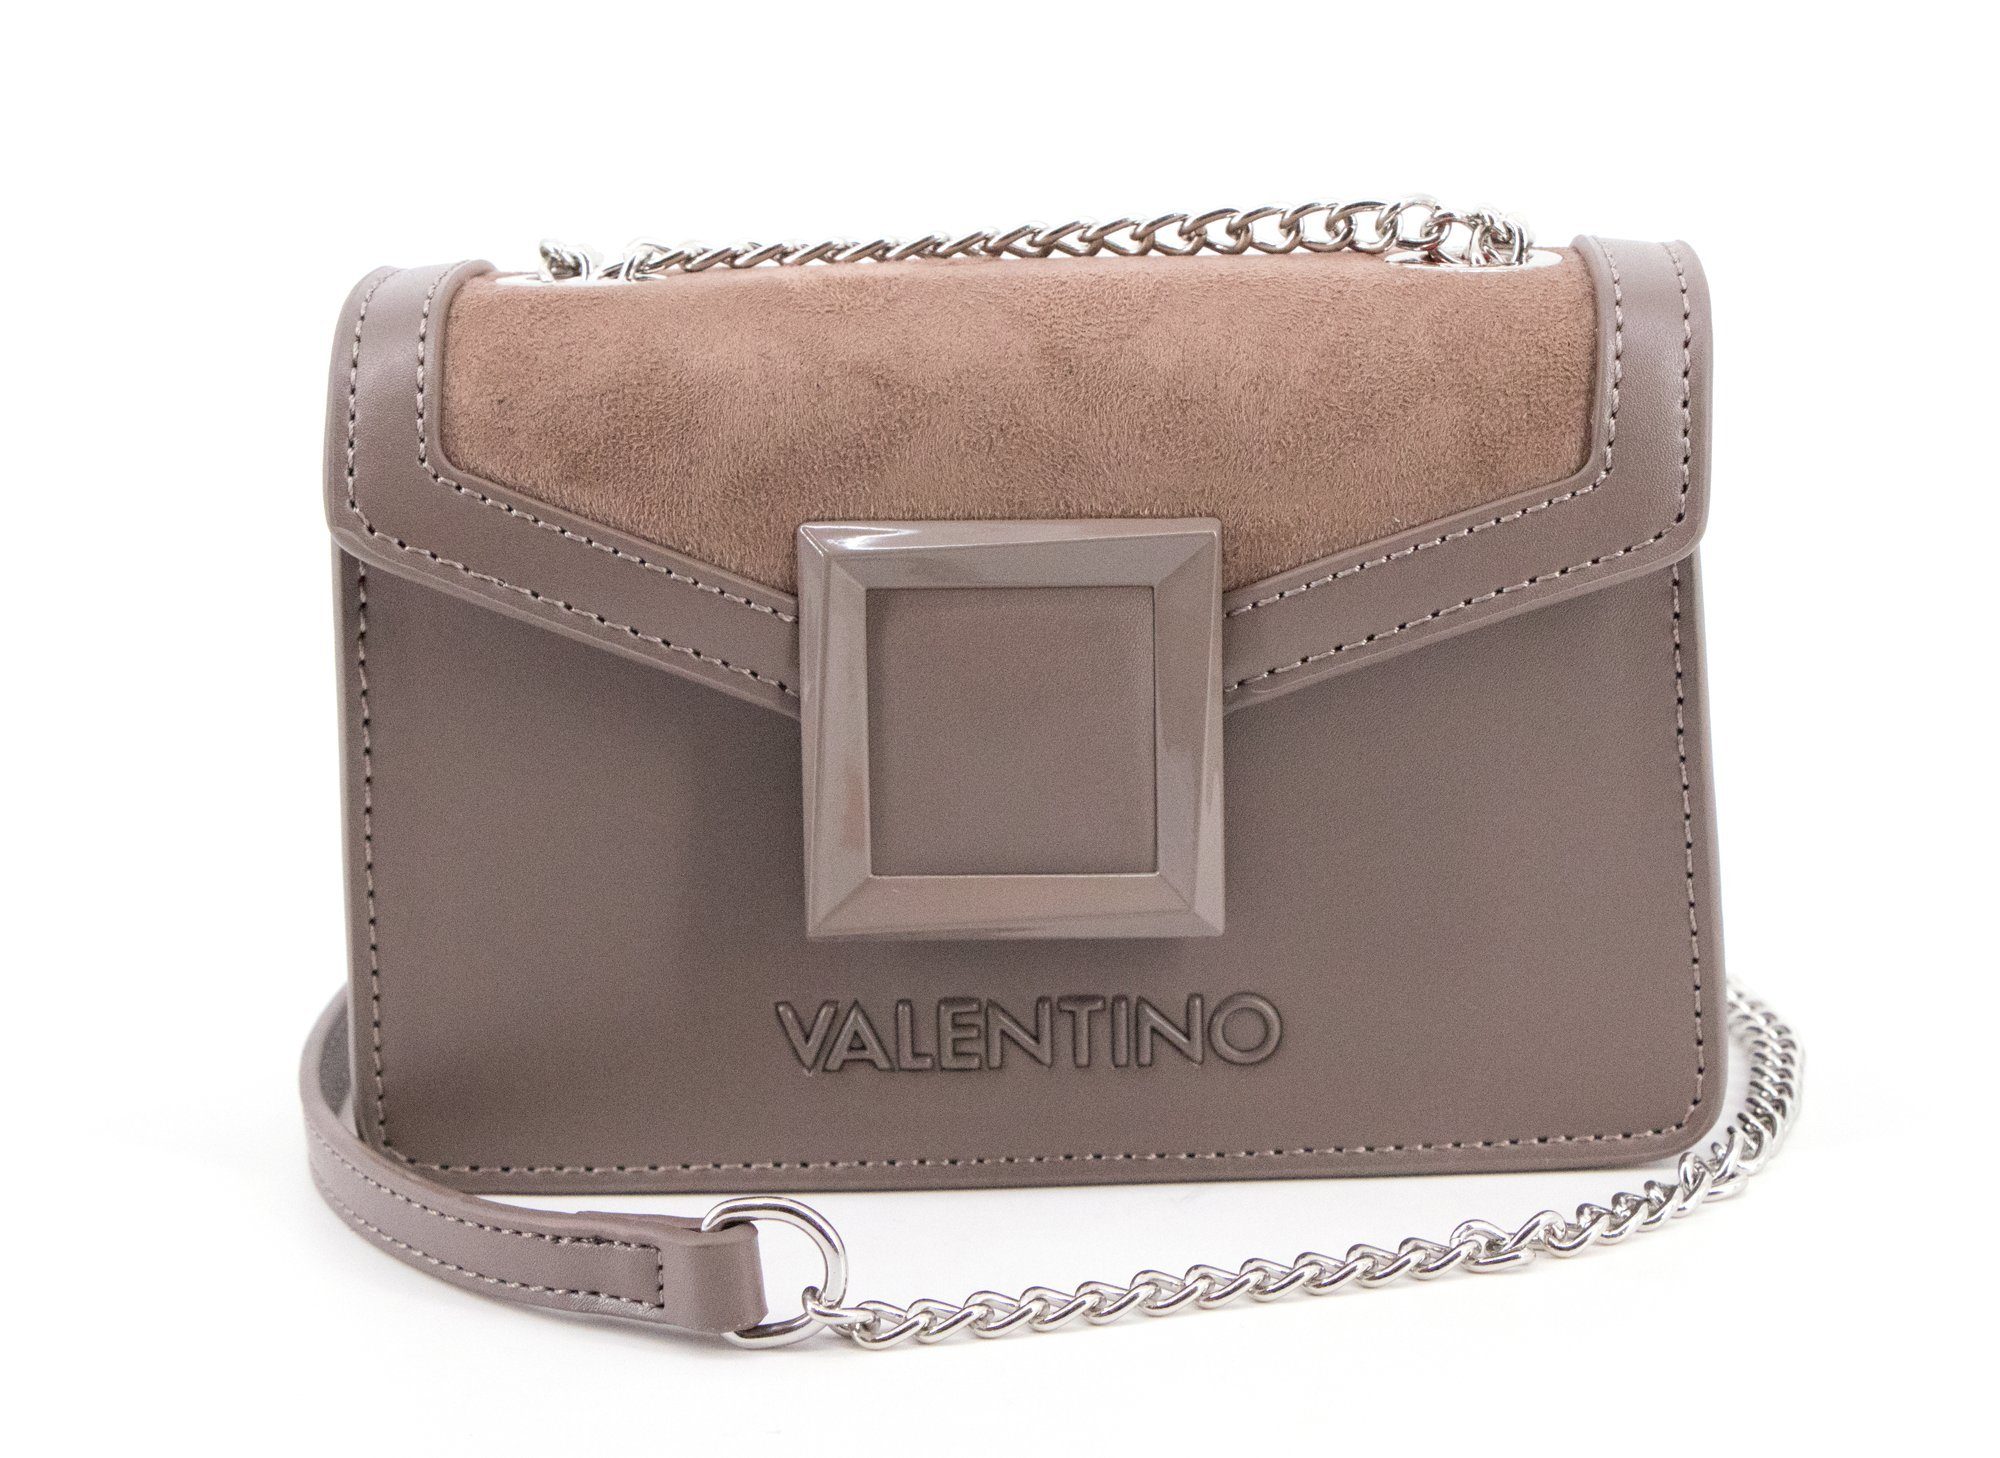 Tasso Valentino - TAUPE BAGS Bags VALENTINO Crossbody VBS5PD02 Umhängetasche